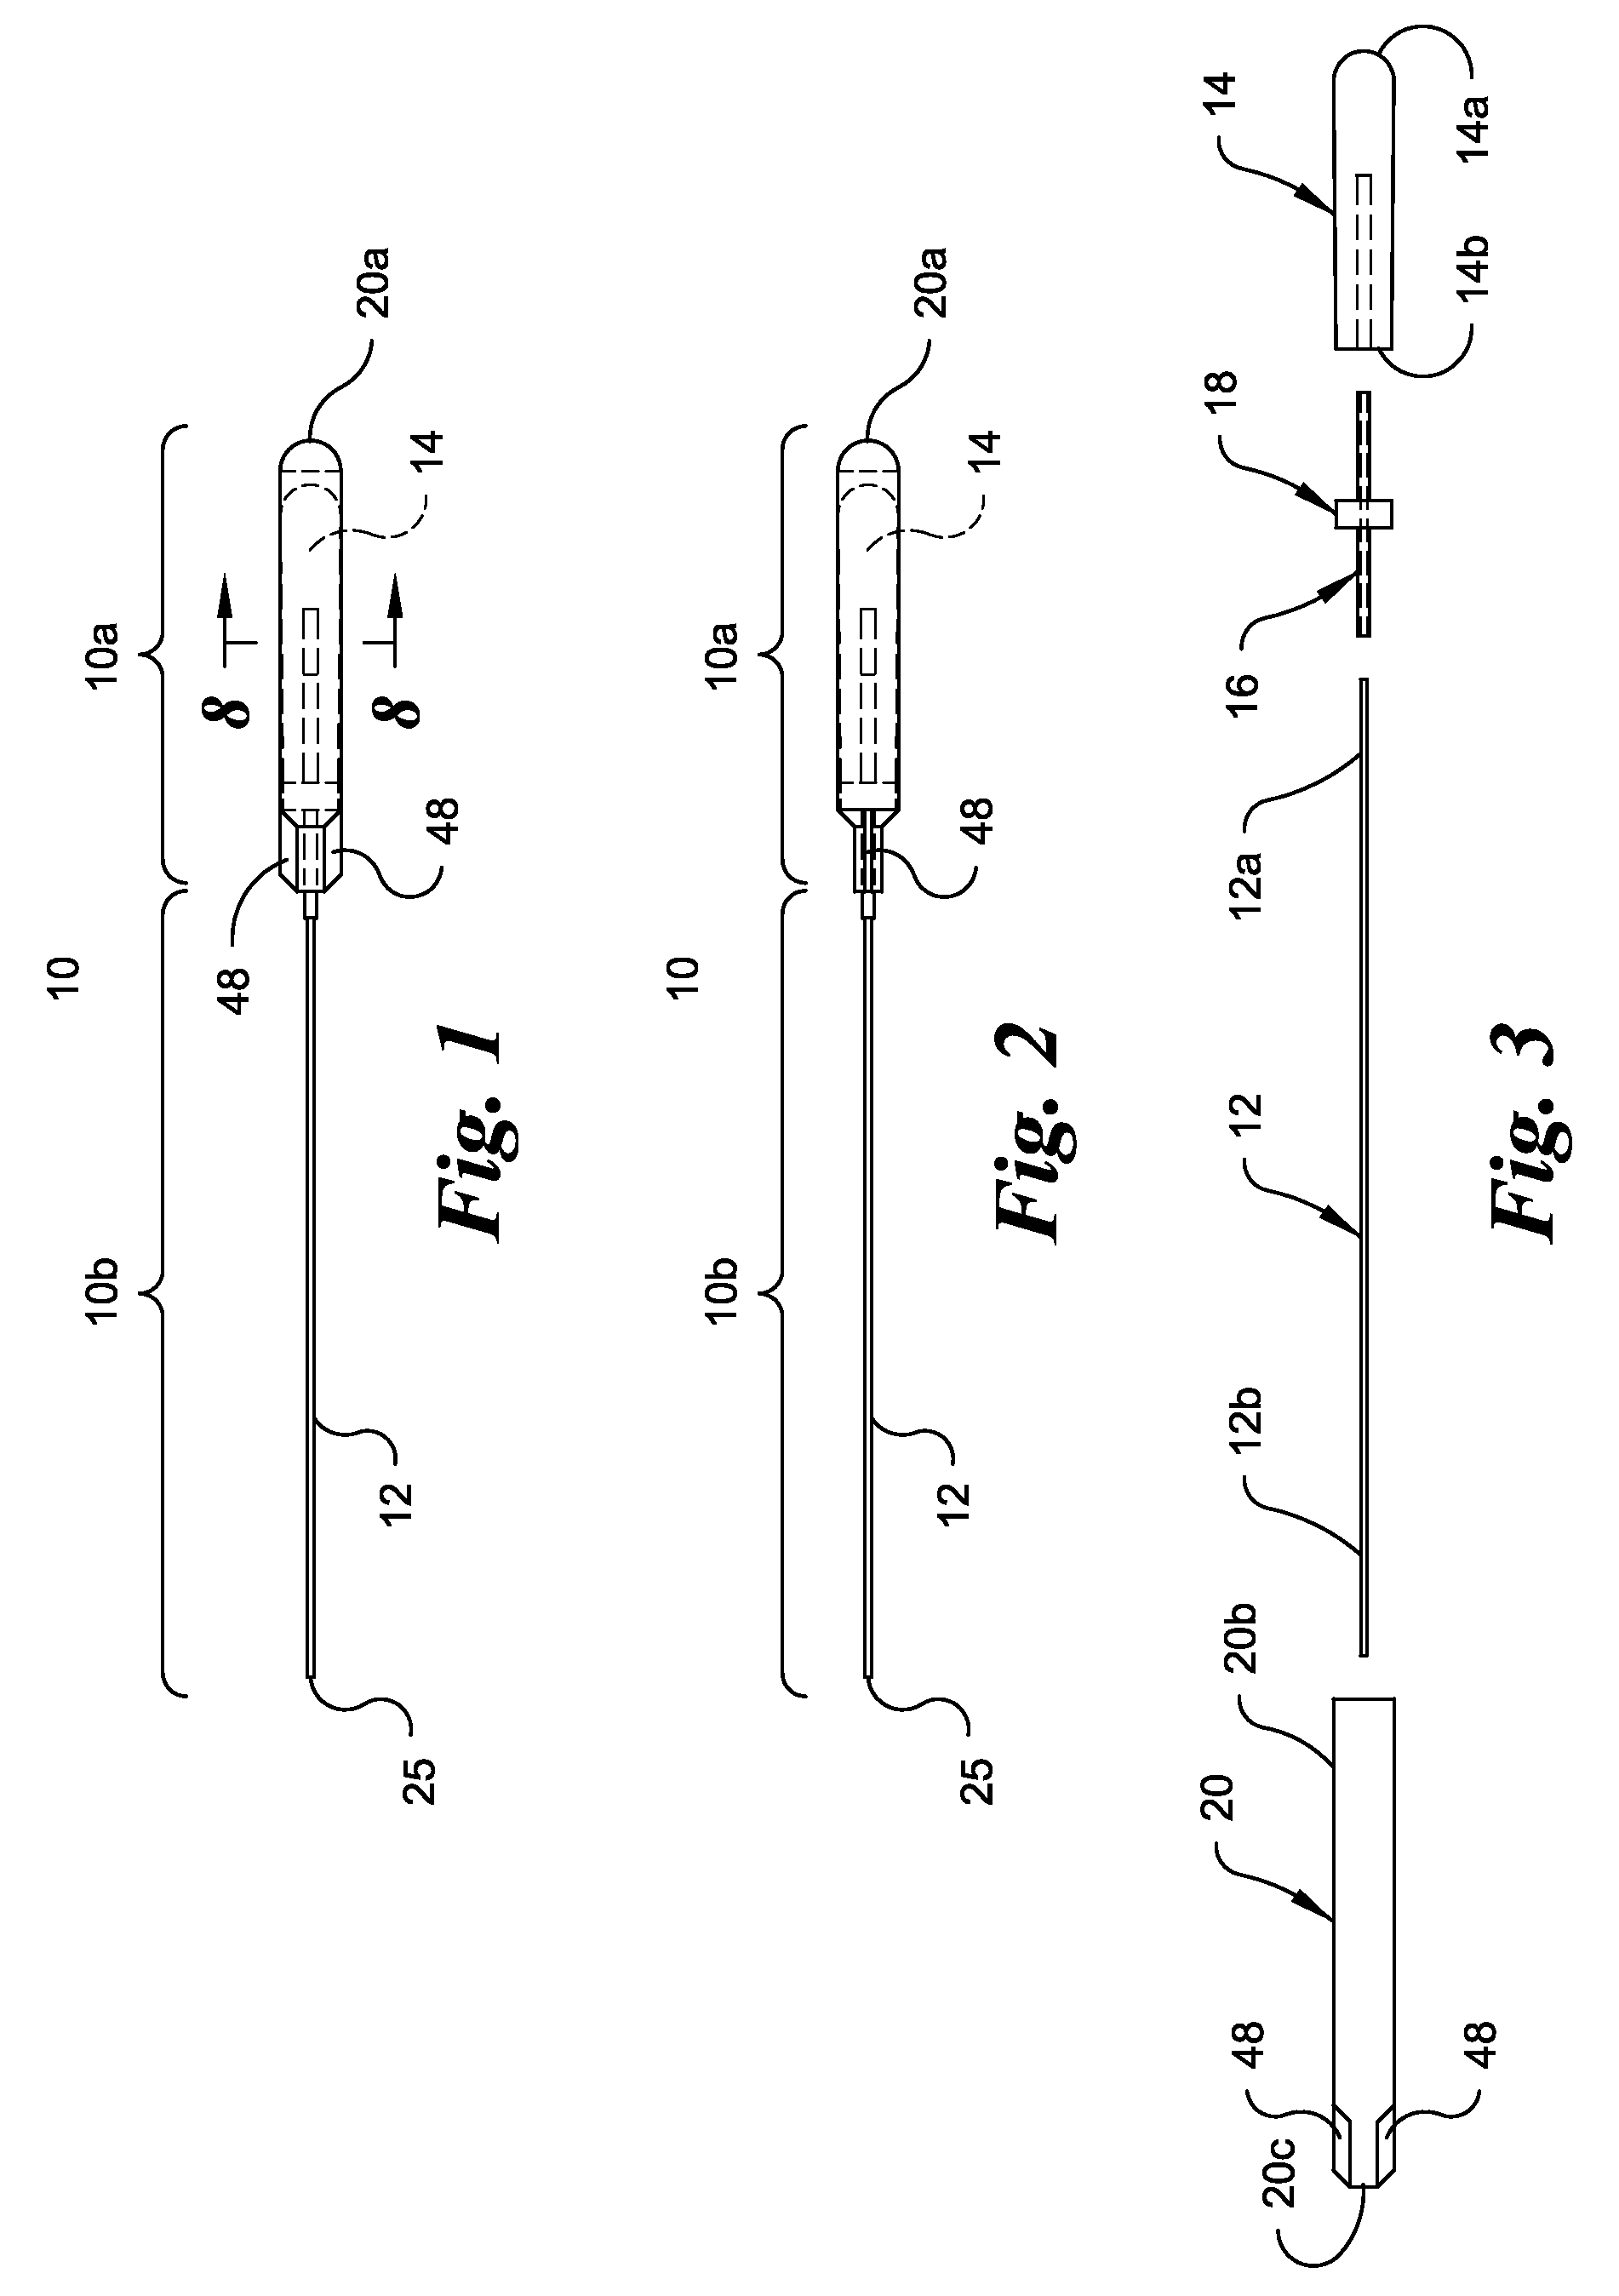 Apparatus and Method for Separating and Storing Human Reproductive Material in a Cryotank